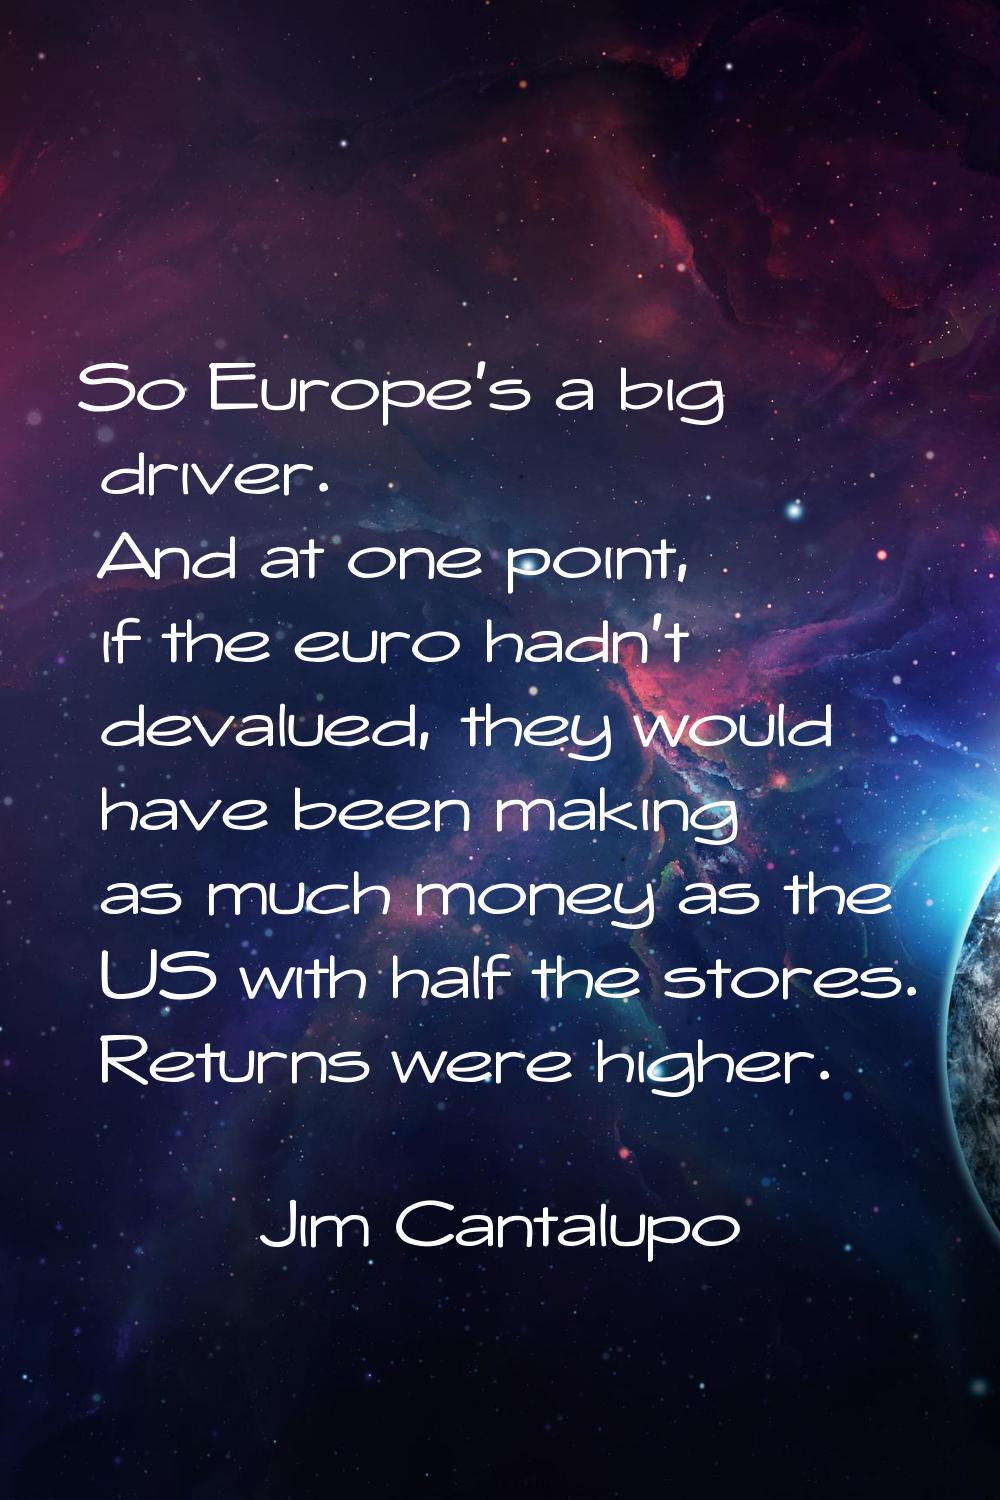 So Europe's a big driver. And at one point, if the euro hadn't devalued, they would have been makin